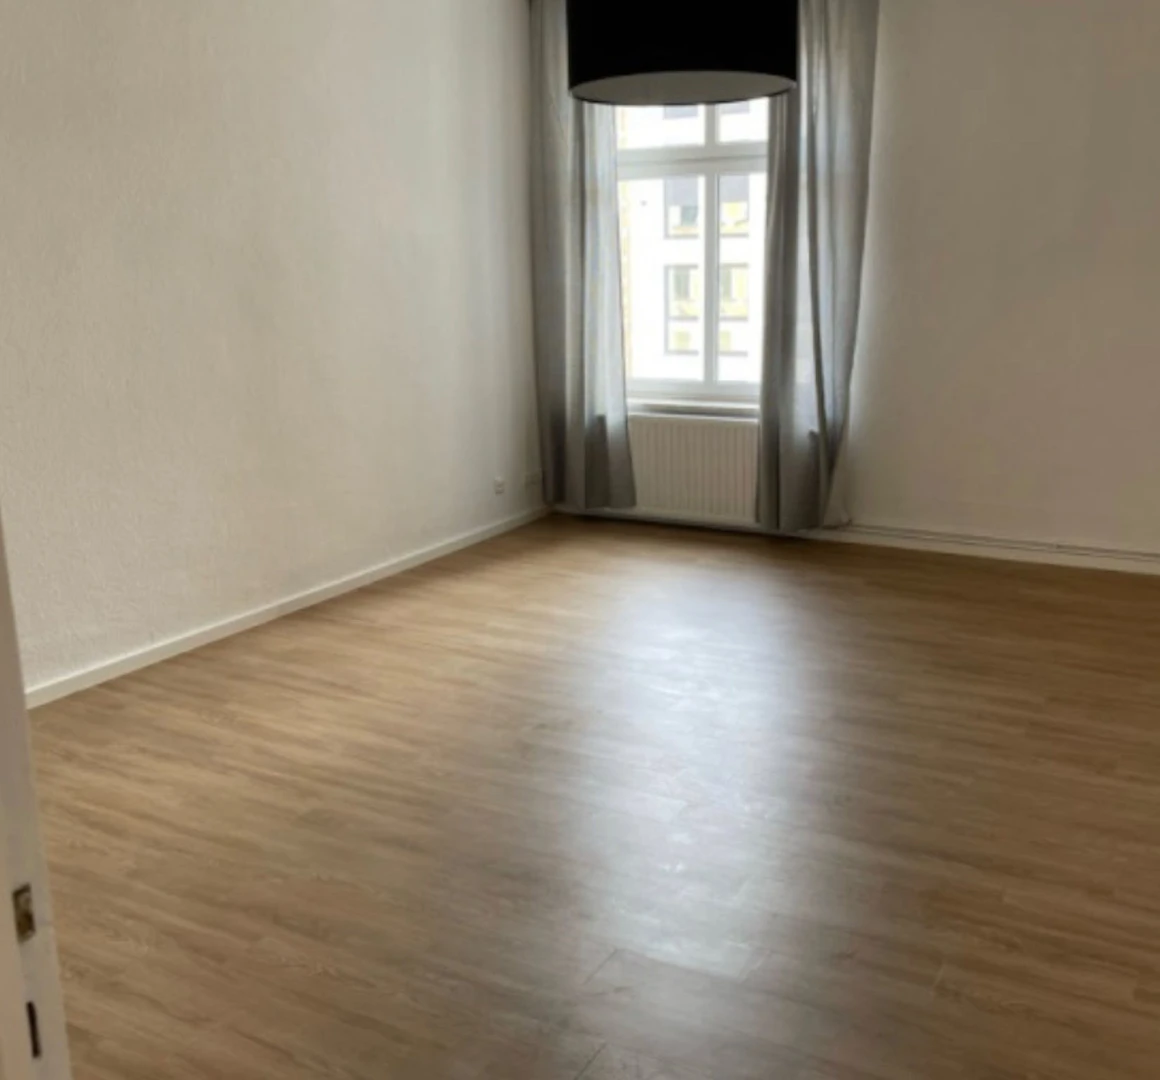 Renting rooms by the month in magdeburg